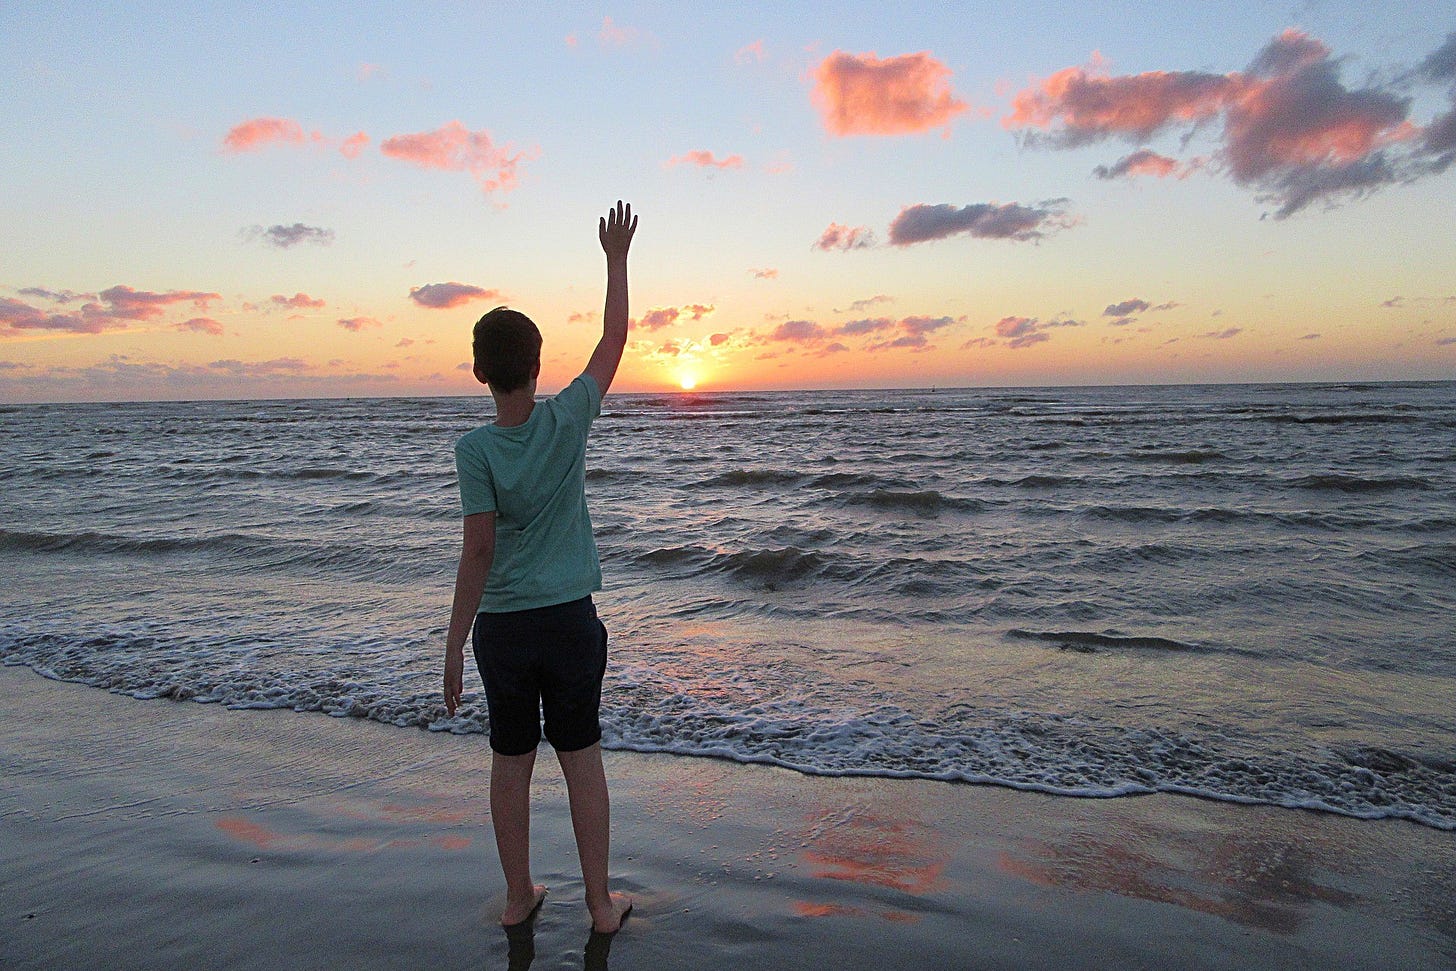 A young boy stands on the shore waving goodbye to a setting sun.